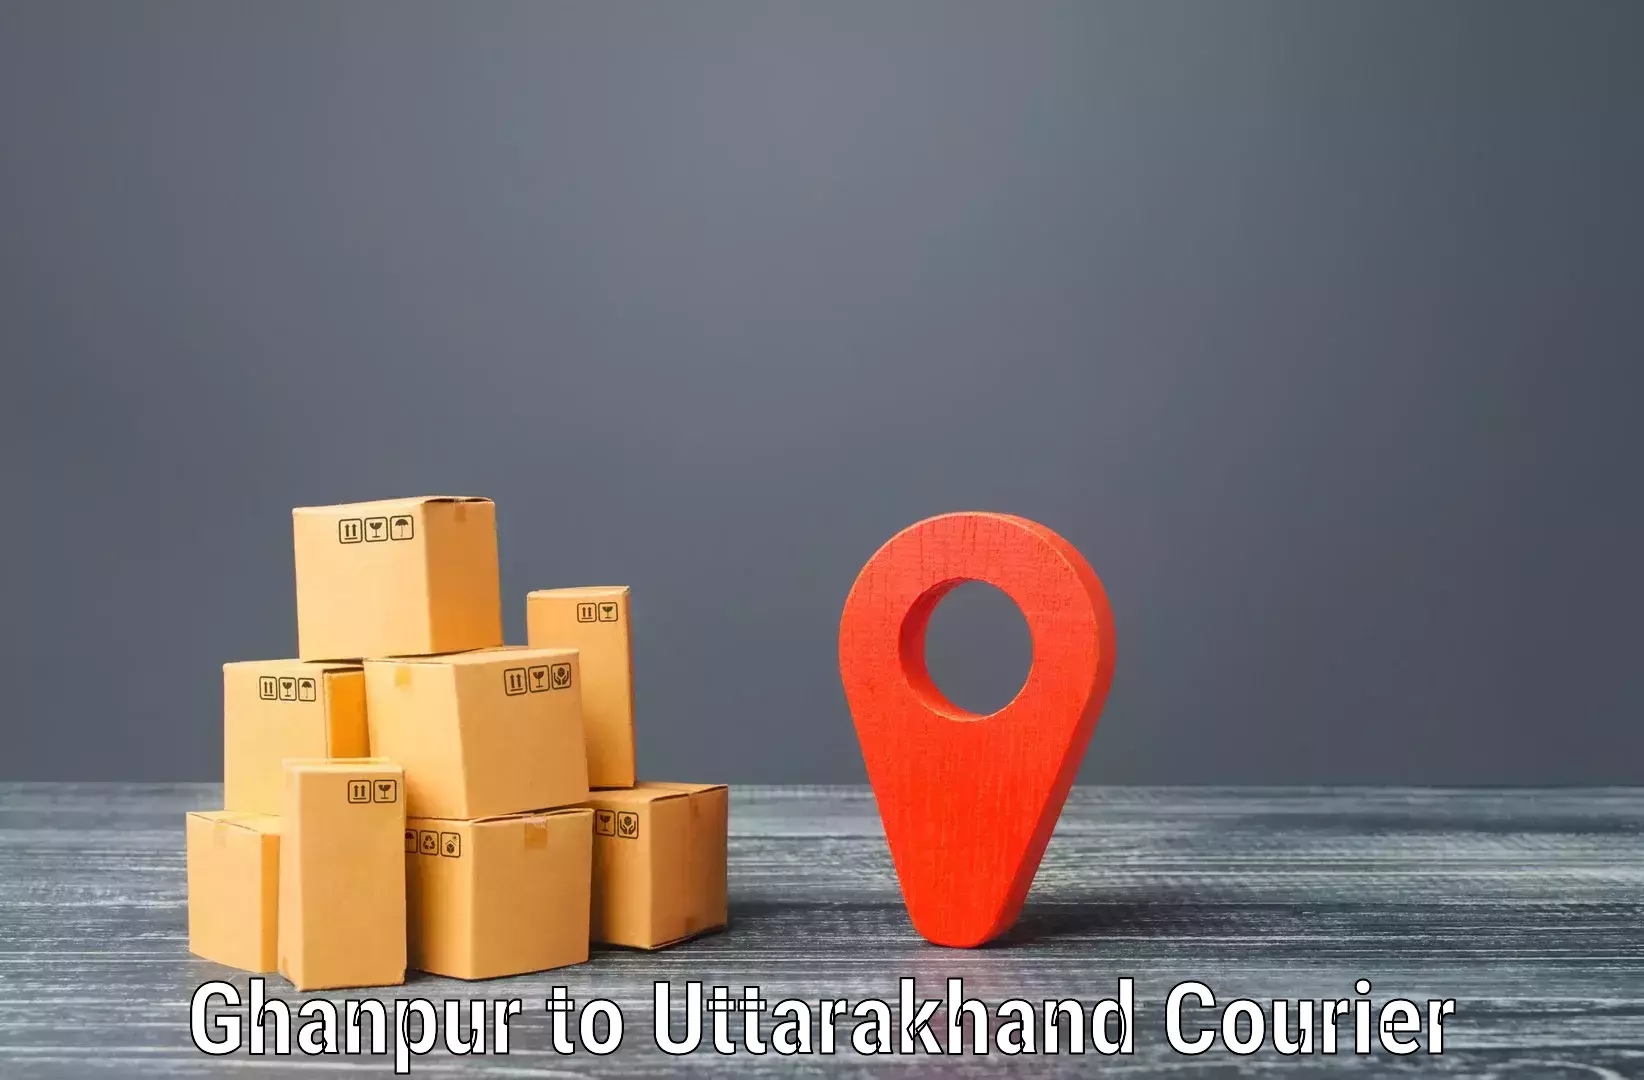 Flexible delivery schedules Ghanpur to Sitarganj